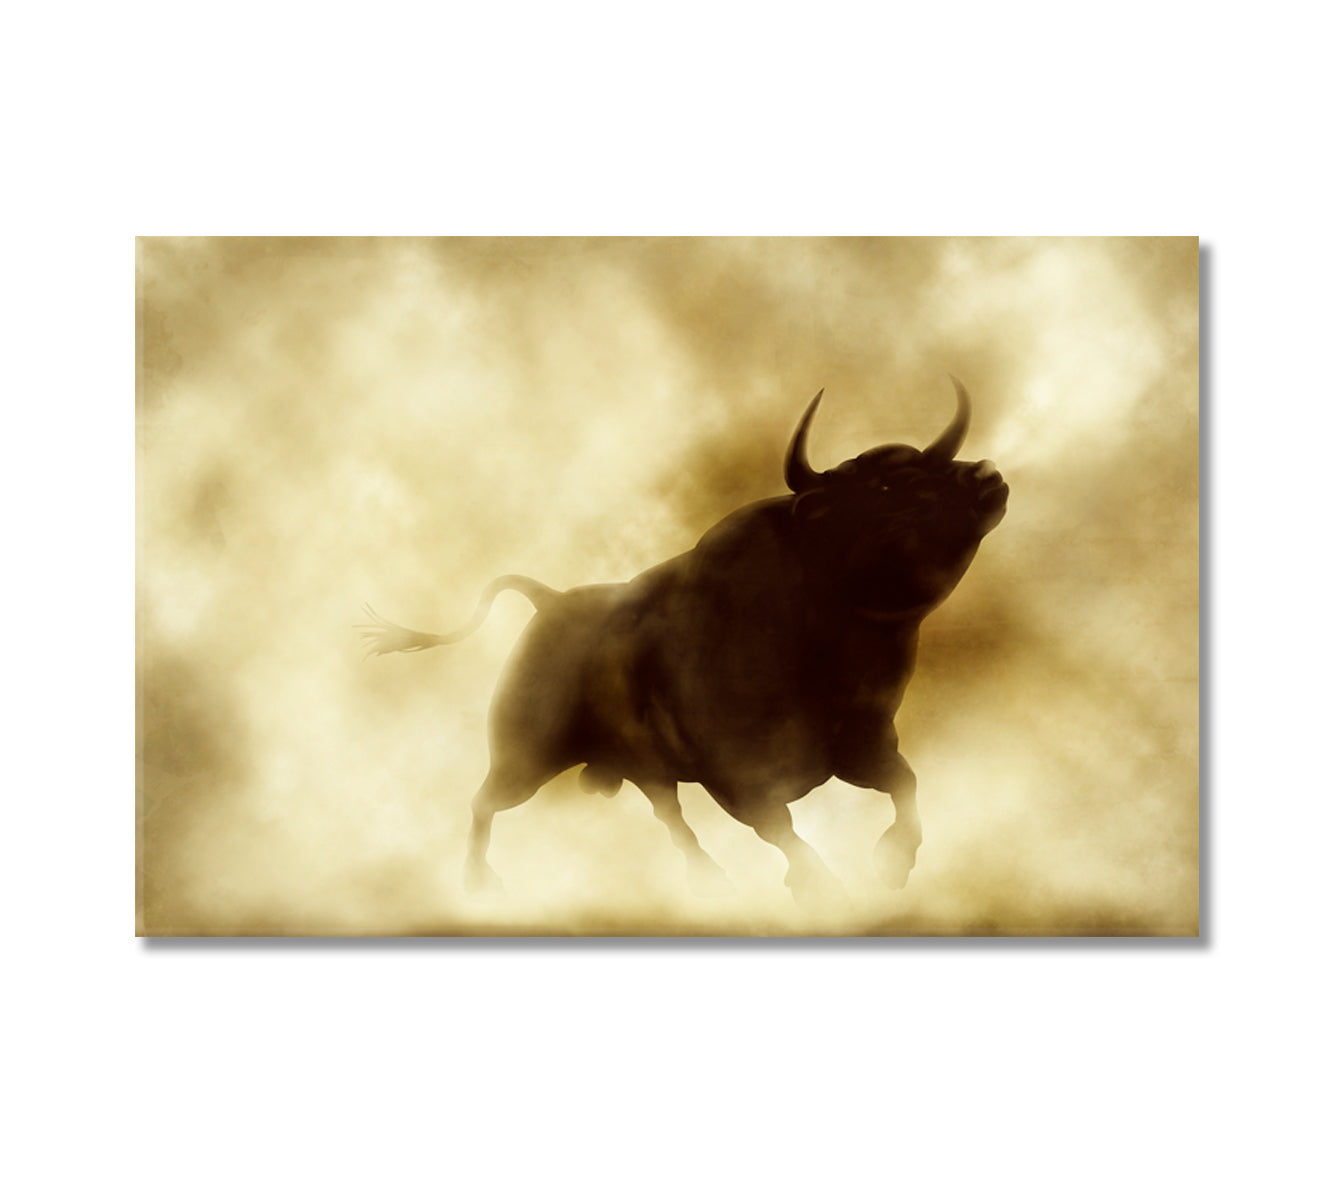 Angry Bull Silhouette in Smoke Canvas Print-Canvas Print-CetArt-1 Panel-24x16 inches-CetArt